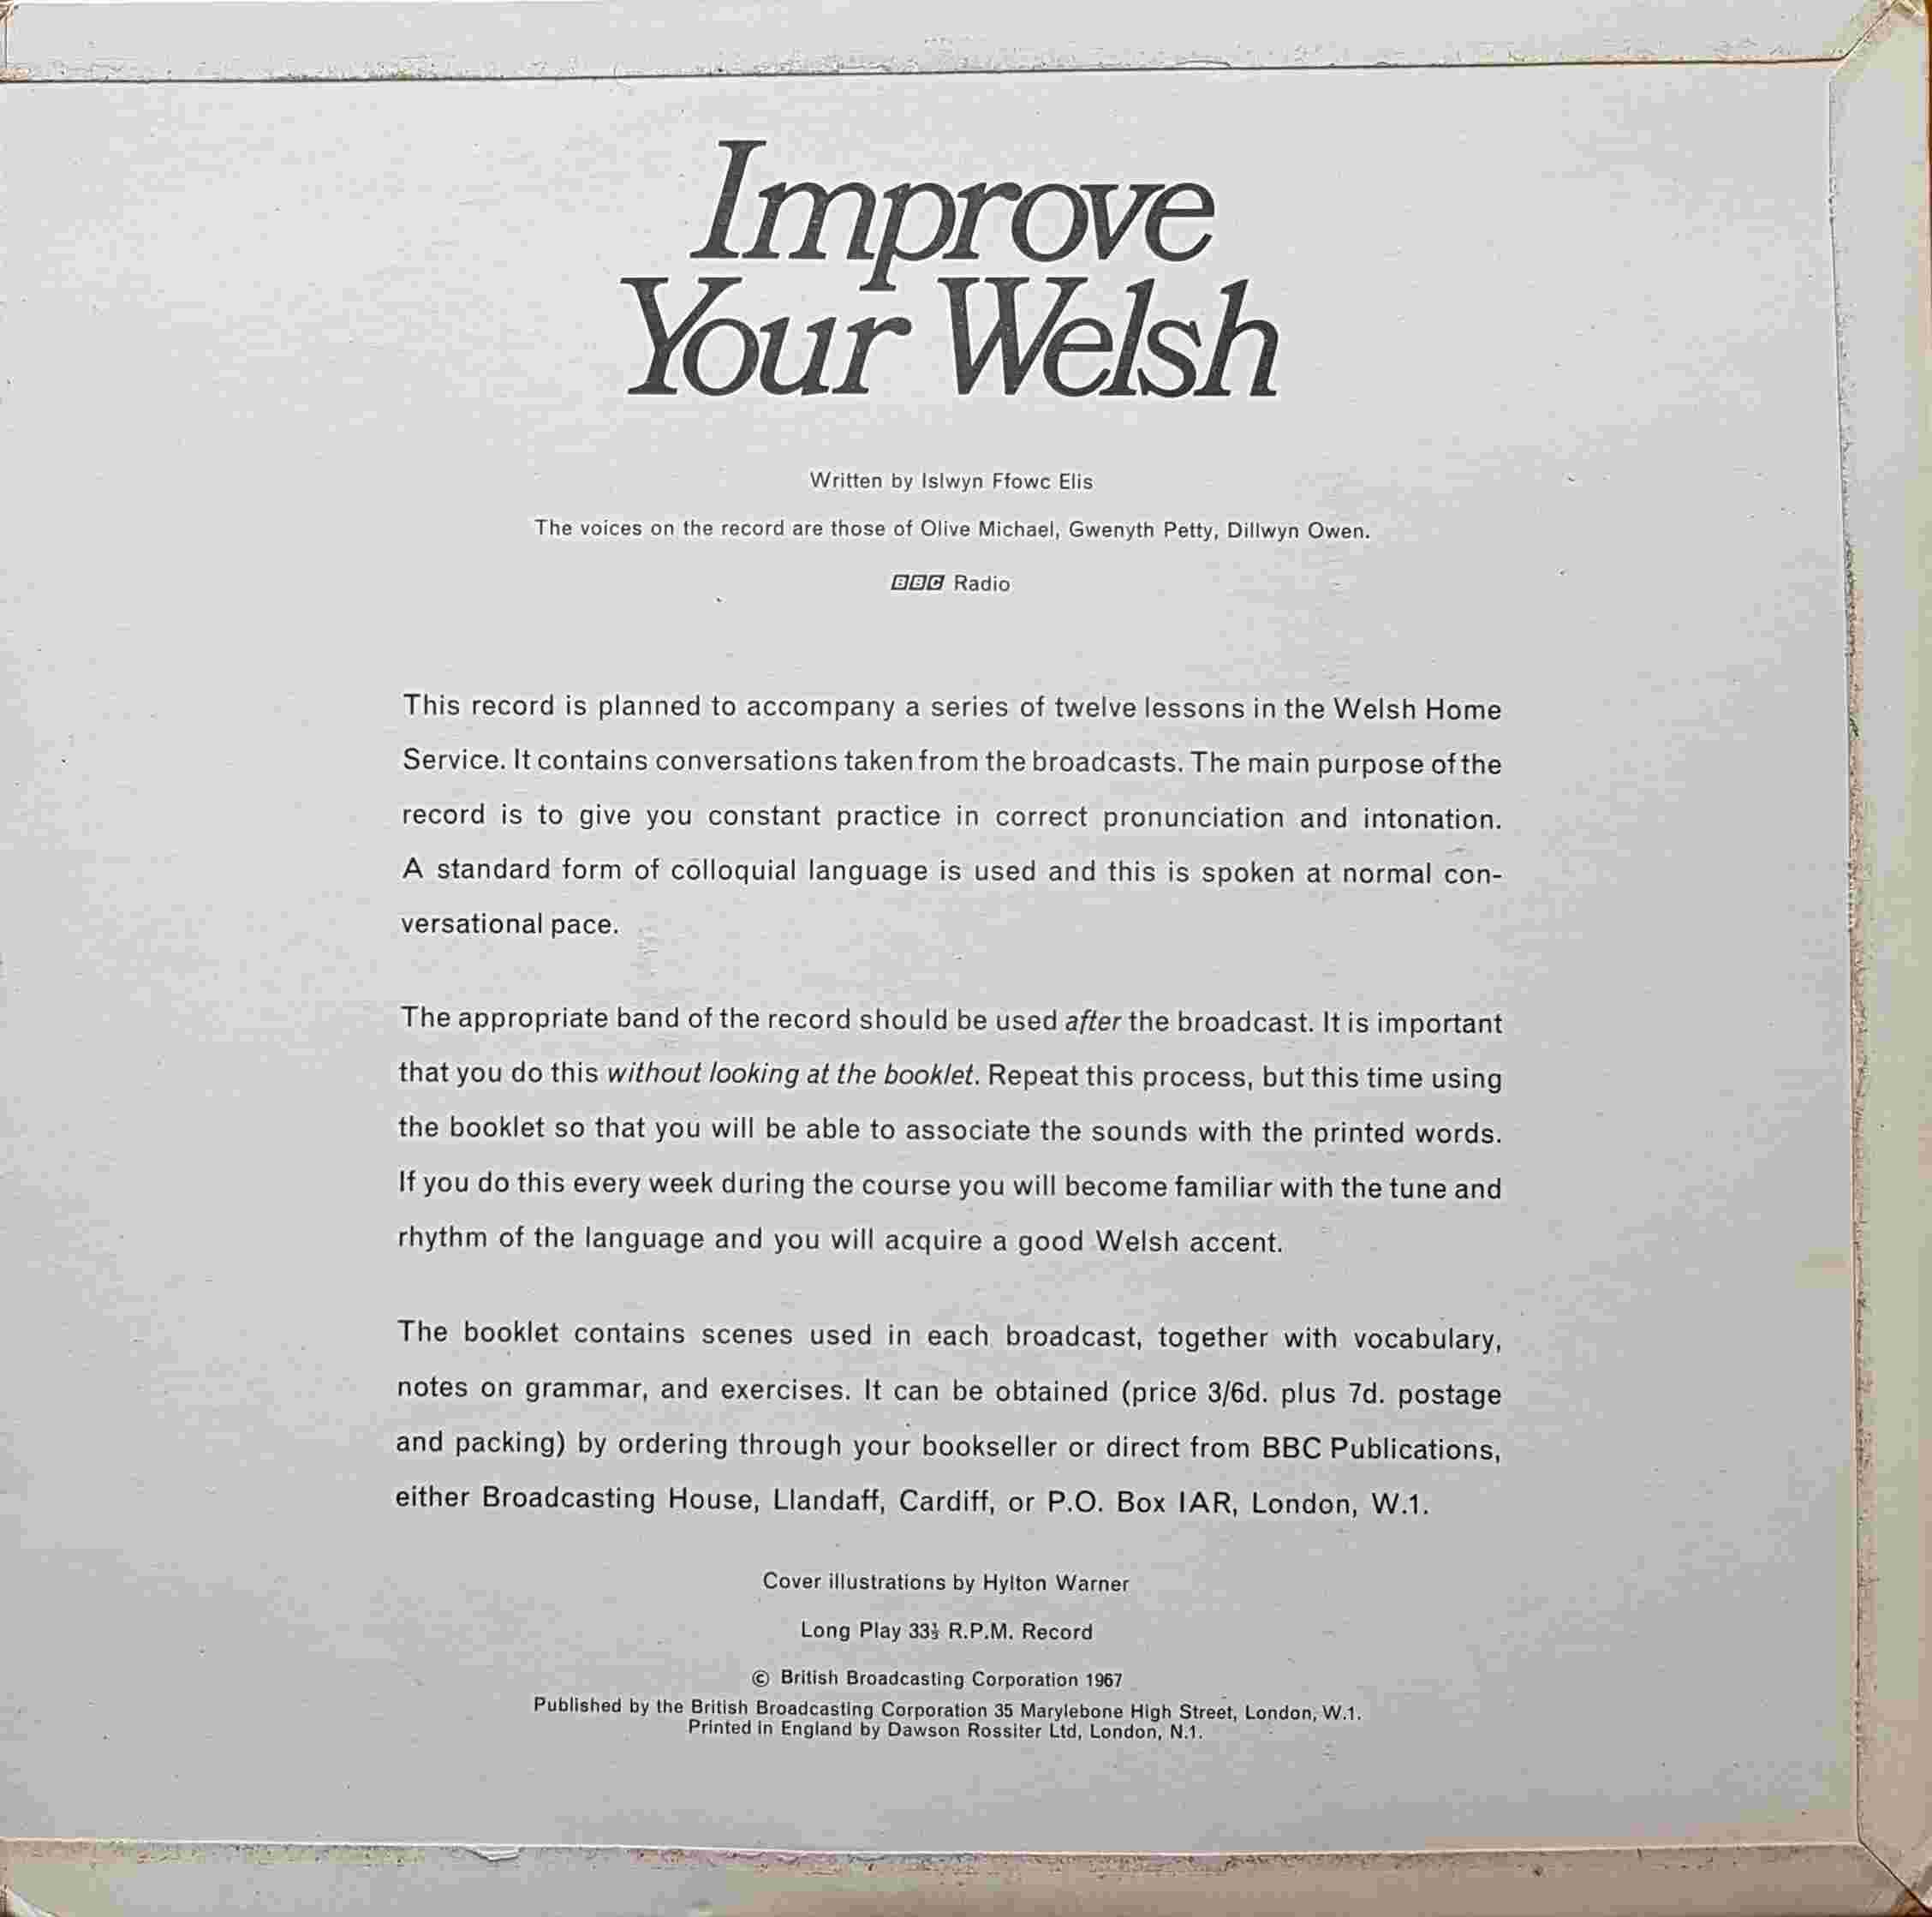 Picture of OP 119/120 Improve your Welsh - BBC second year radio course of twelve lessons by artist Islwyn Ffowc Elis from the BBC records and Tapes library